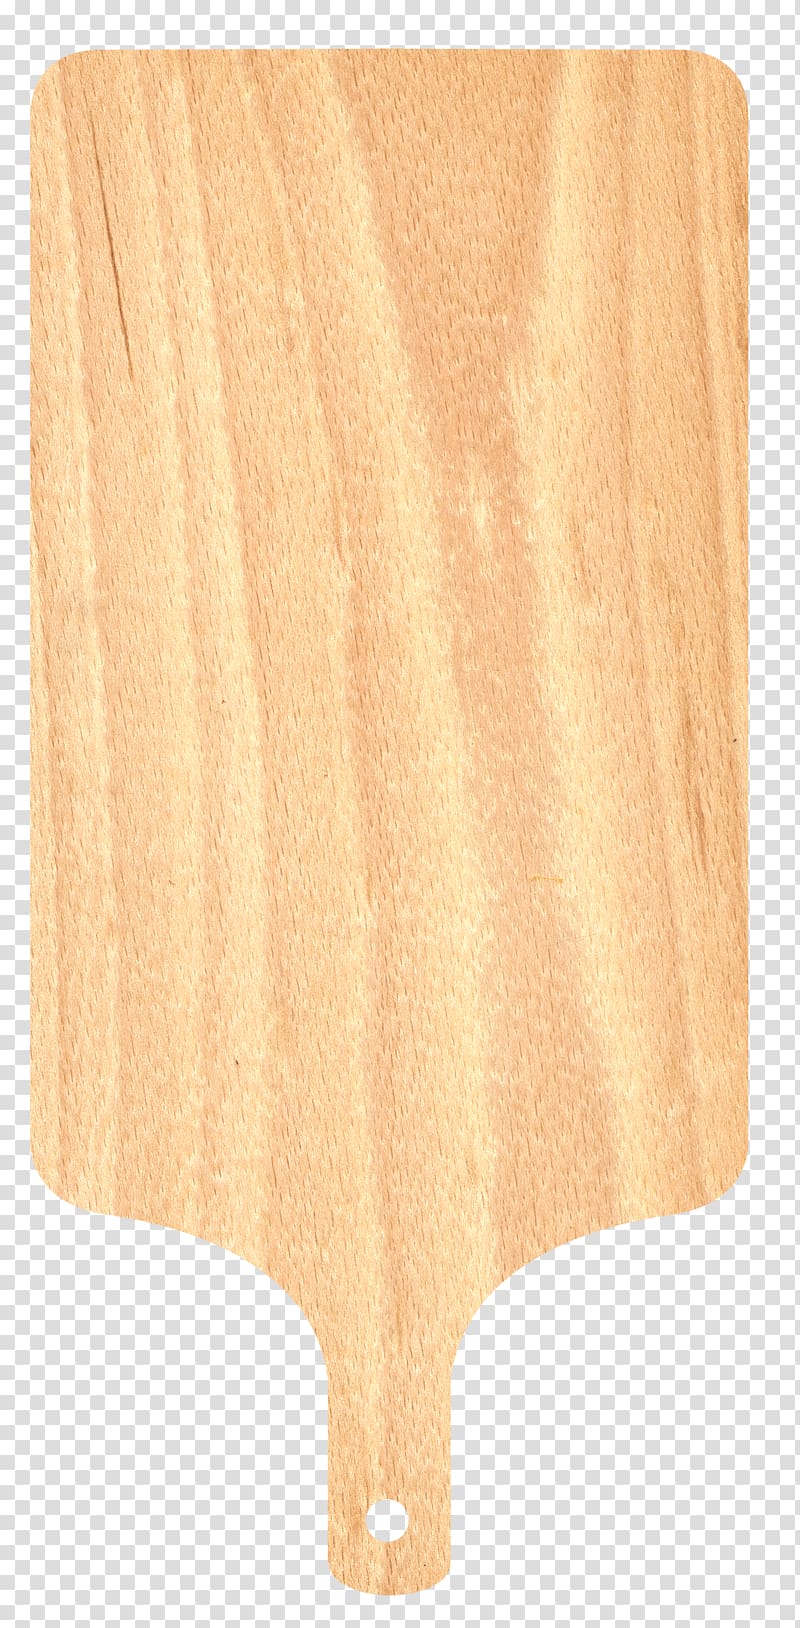 brown chopping board, Cutting board Wood, Wood cutting board transparent background PNG clipart